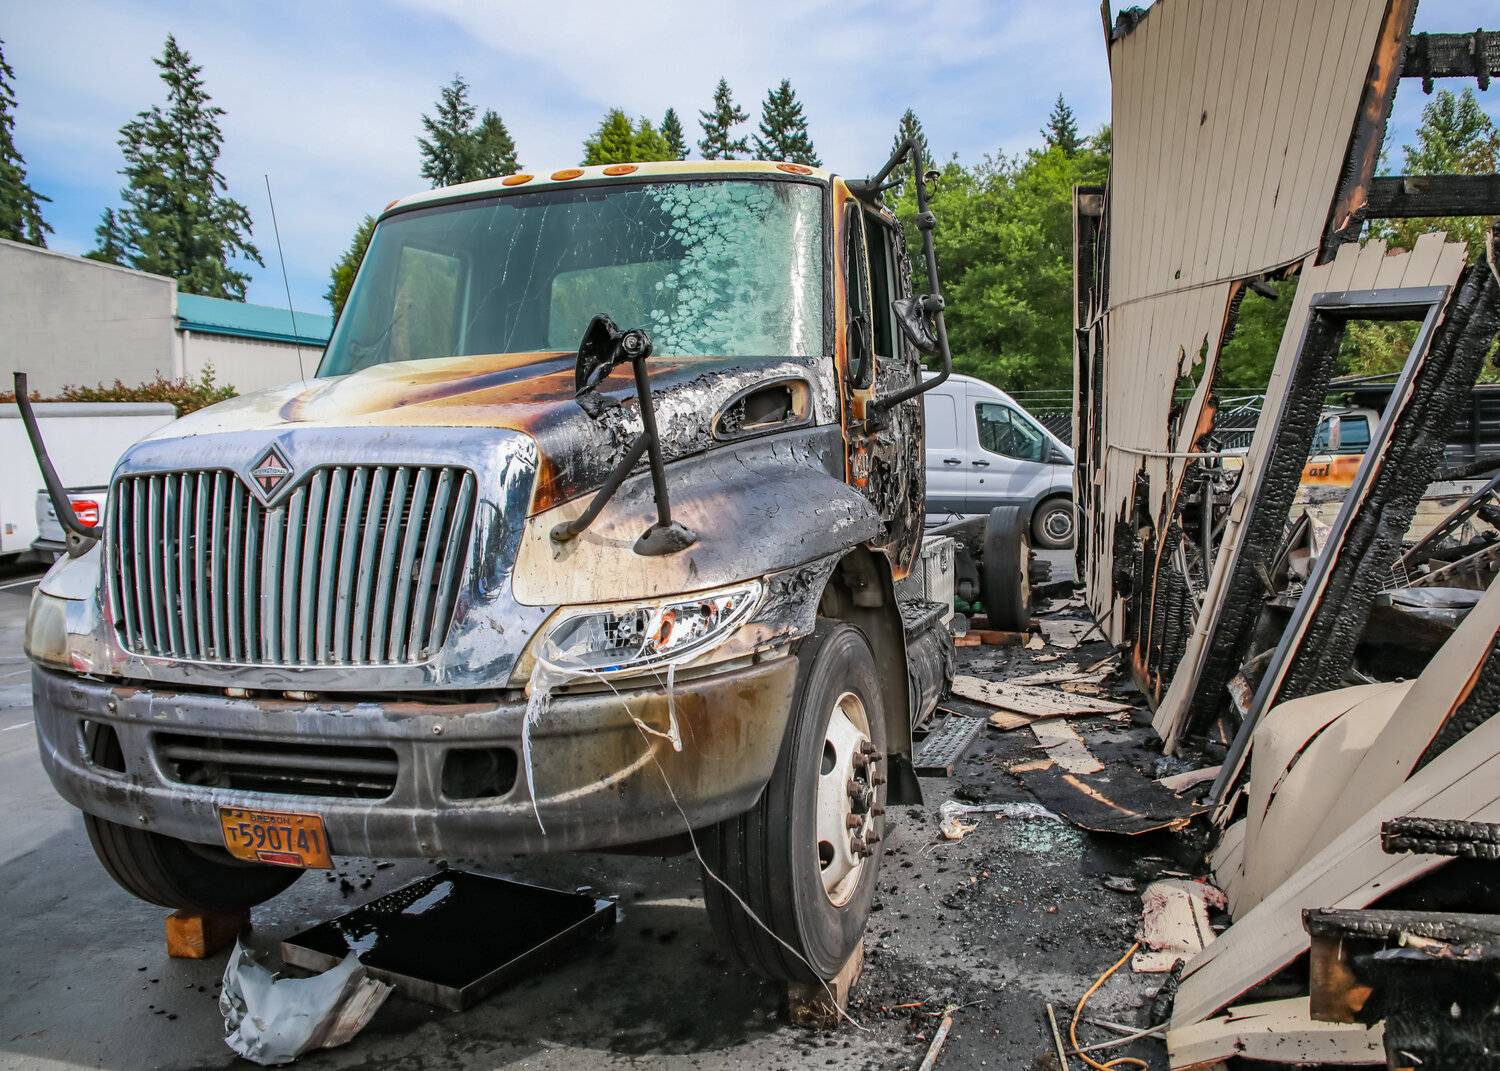 A truck was burnt on the side facing the industrial building that caught fire late on Tuesday, June 6, in Salmon Creek.